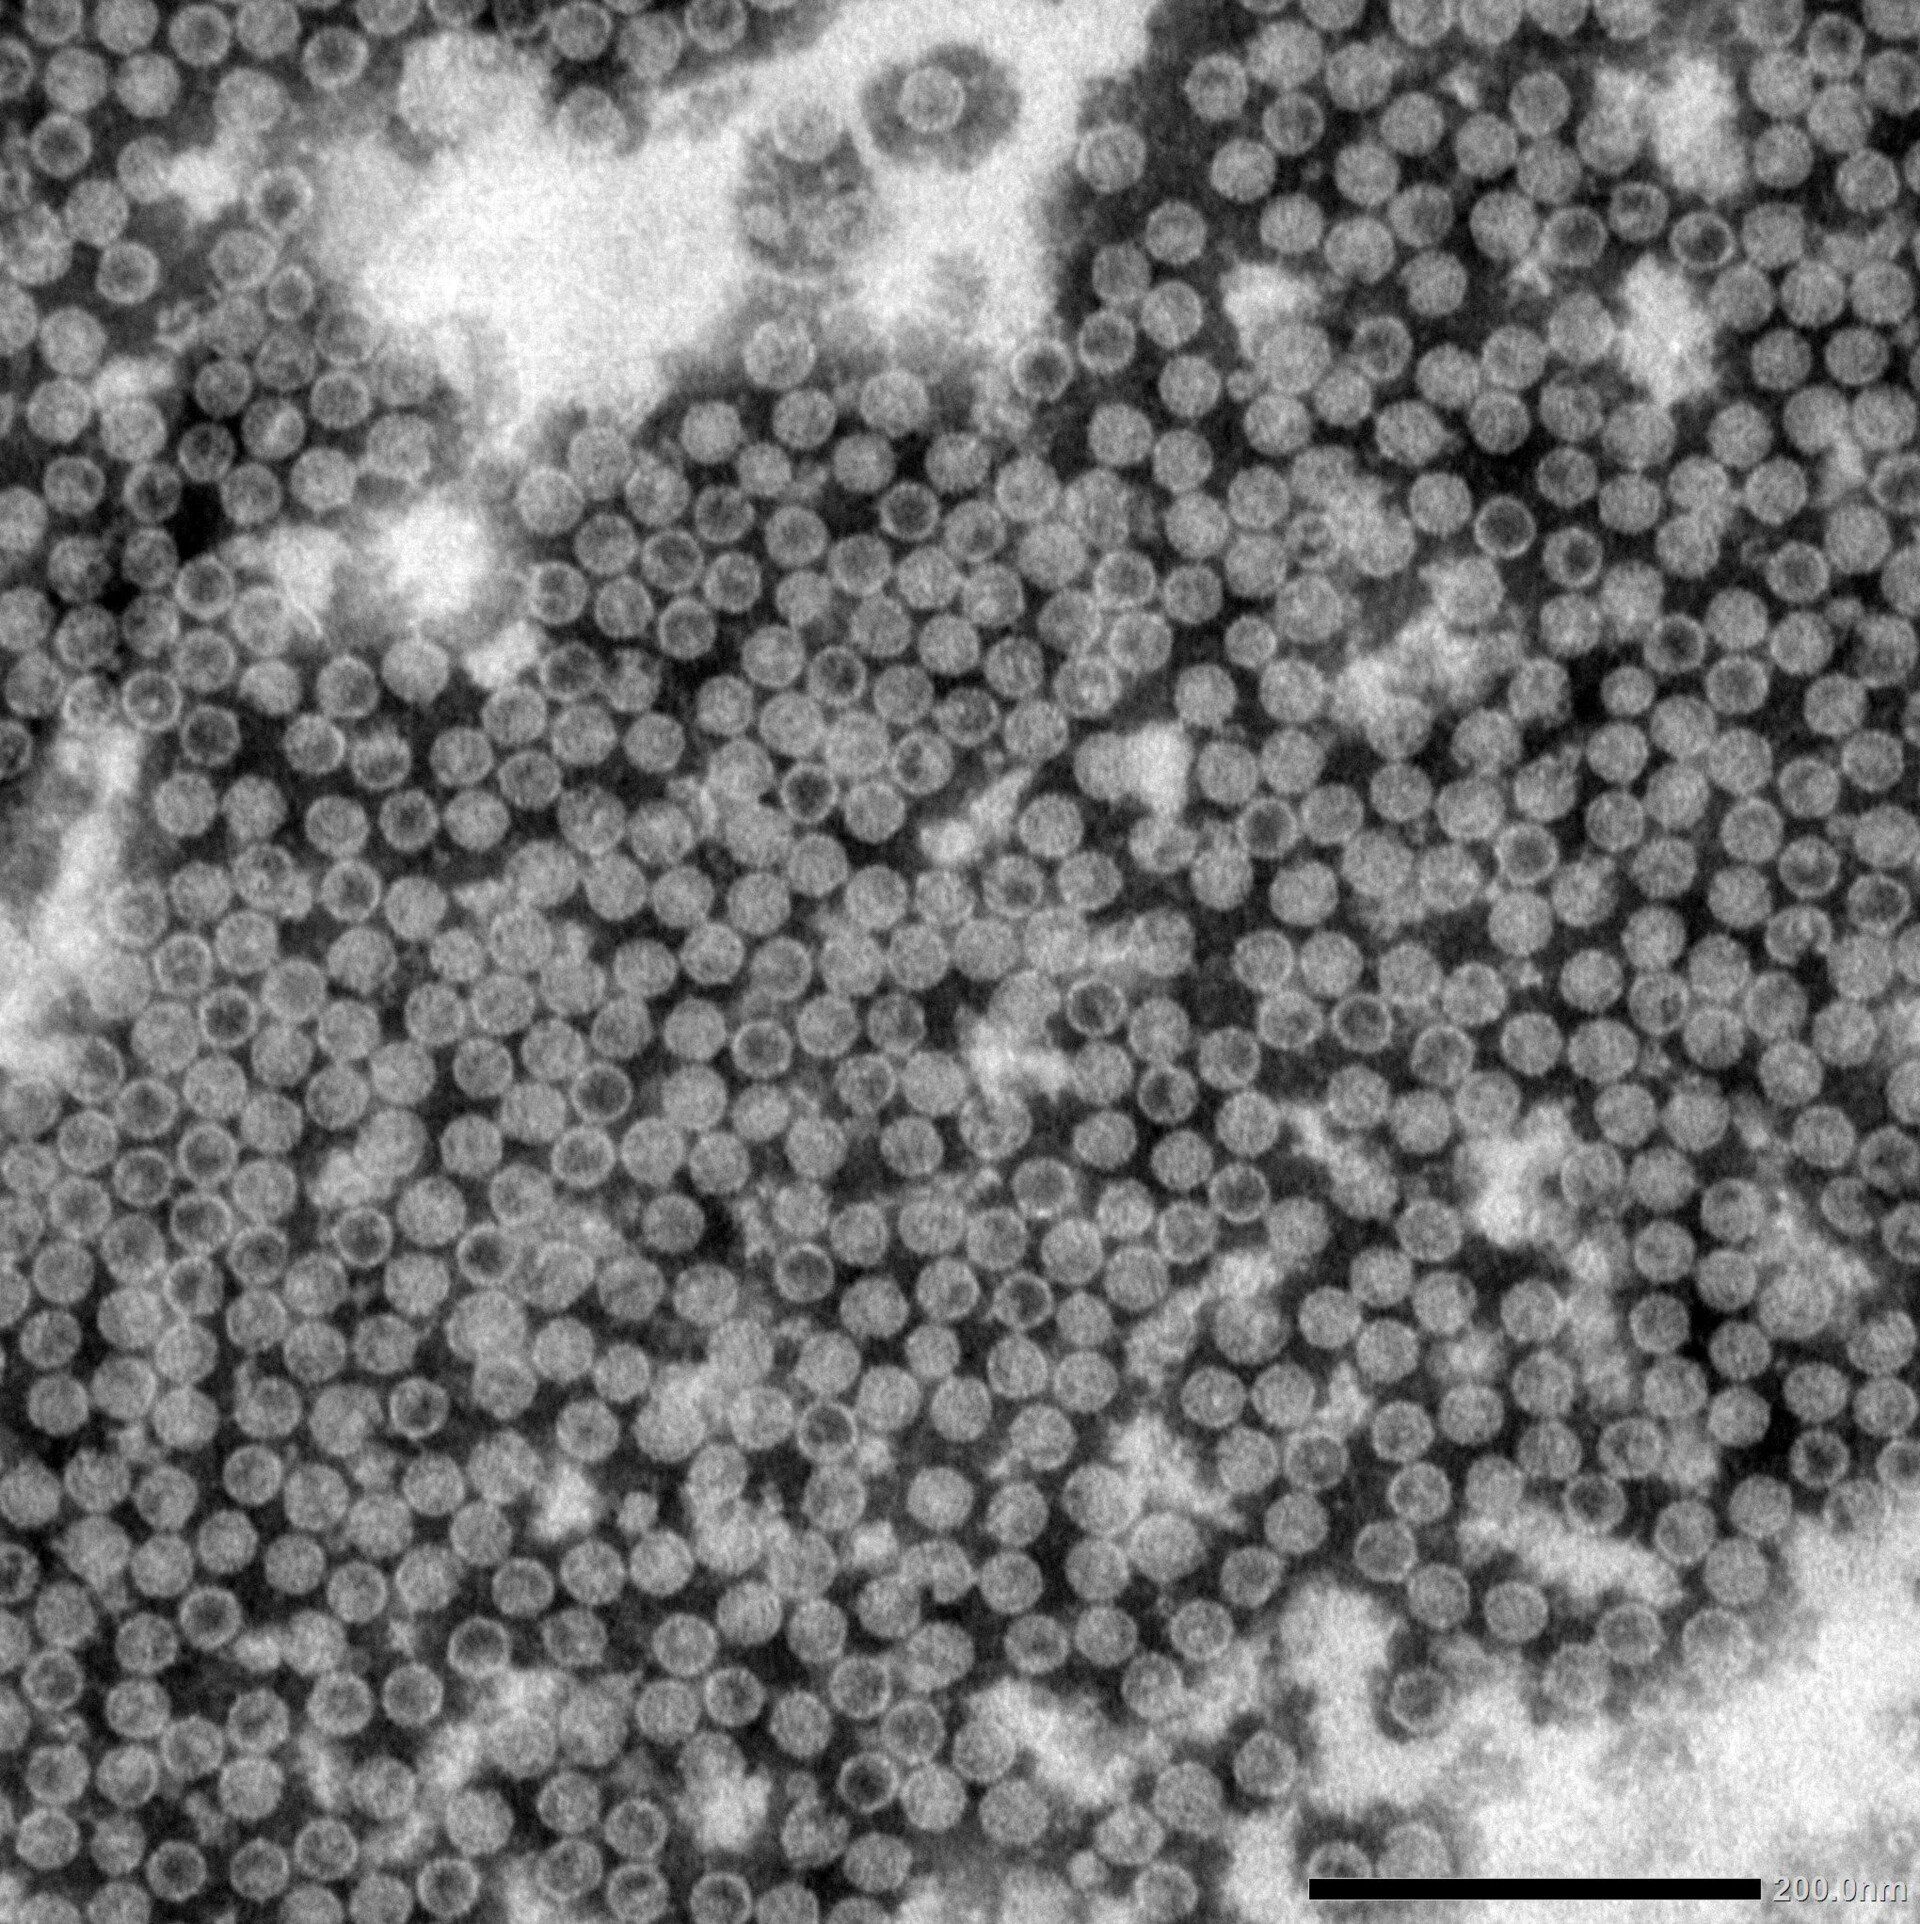 Electron micrograph of VLPs produced in ALiCE